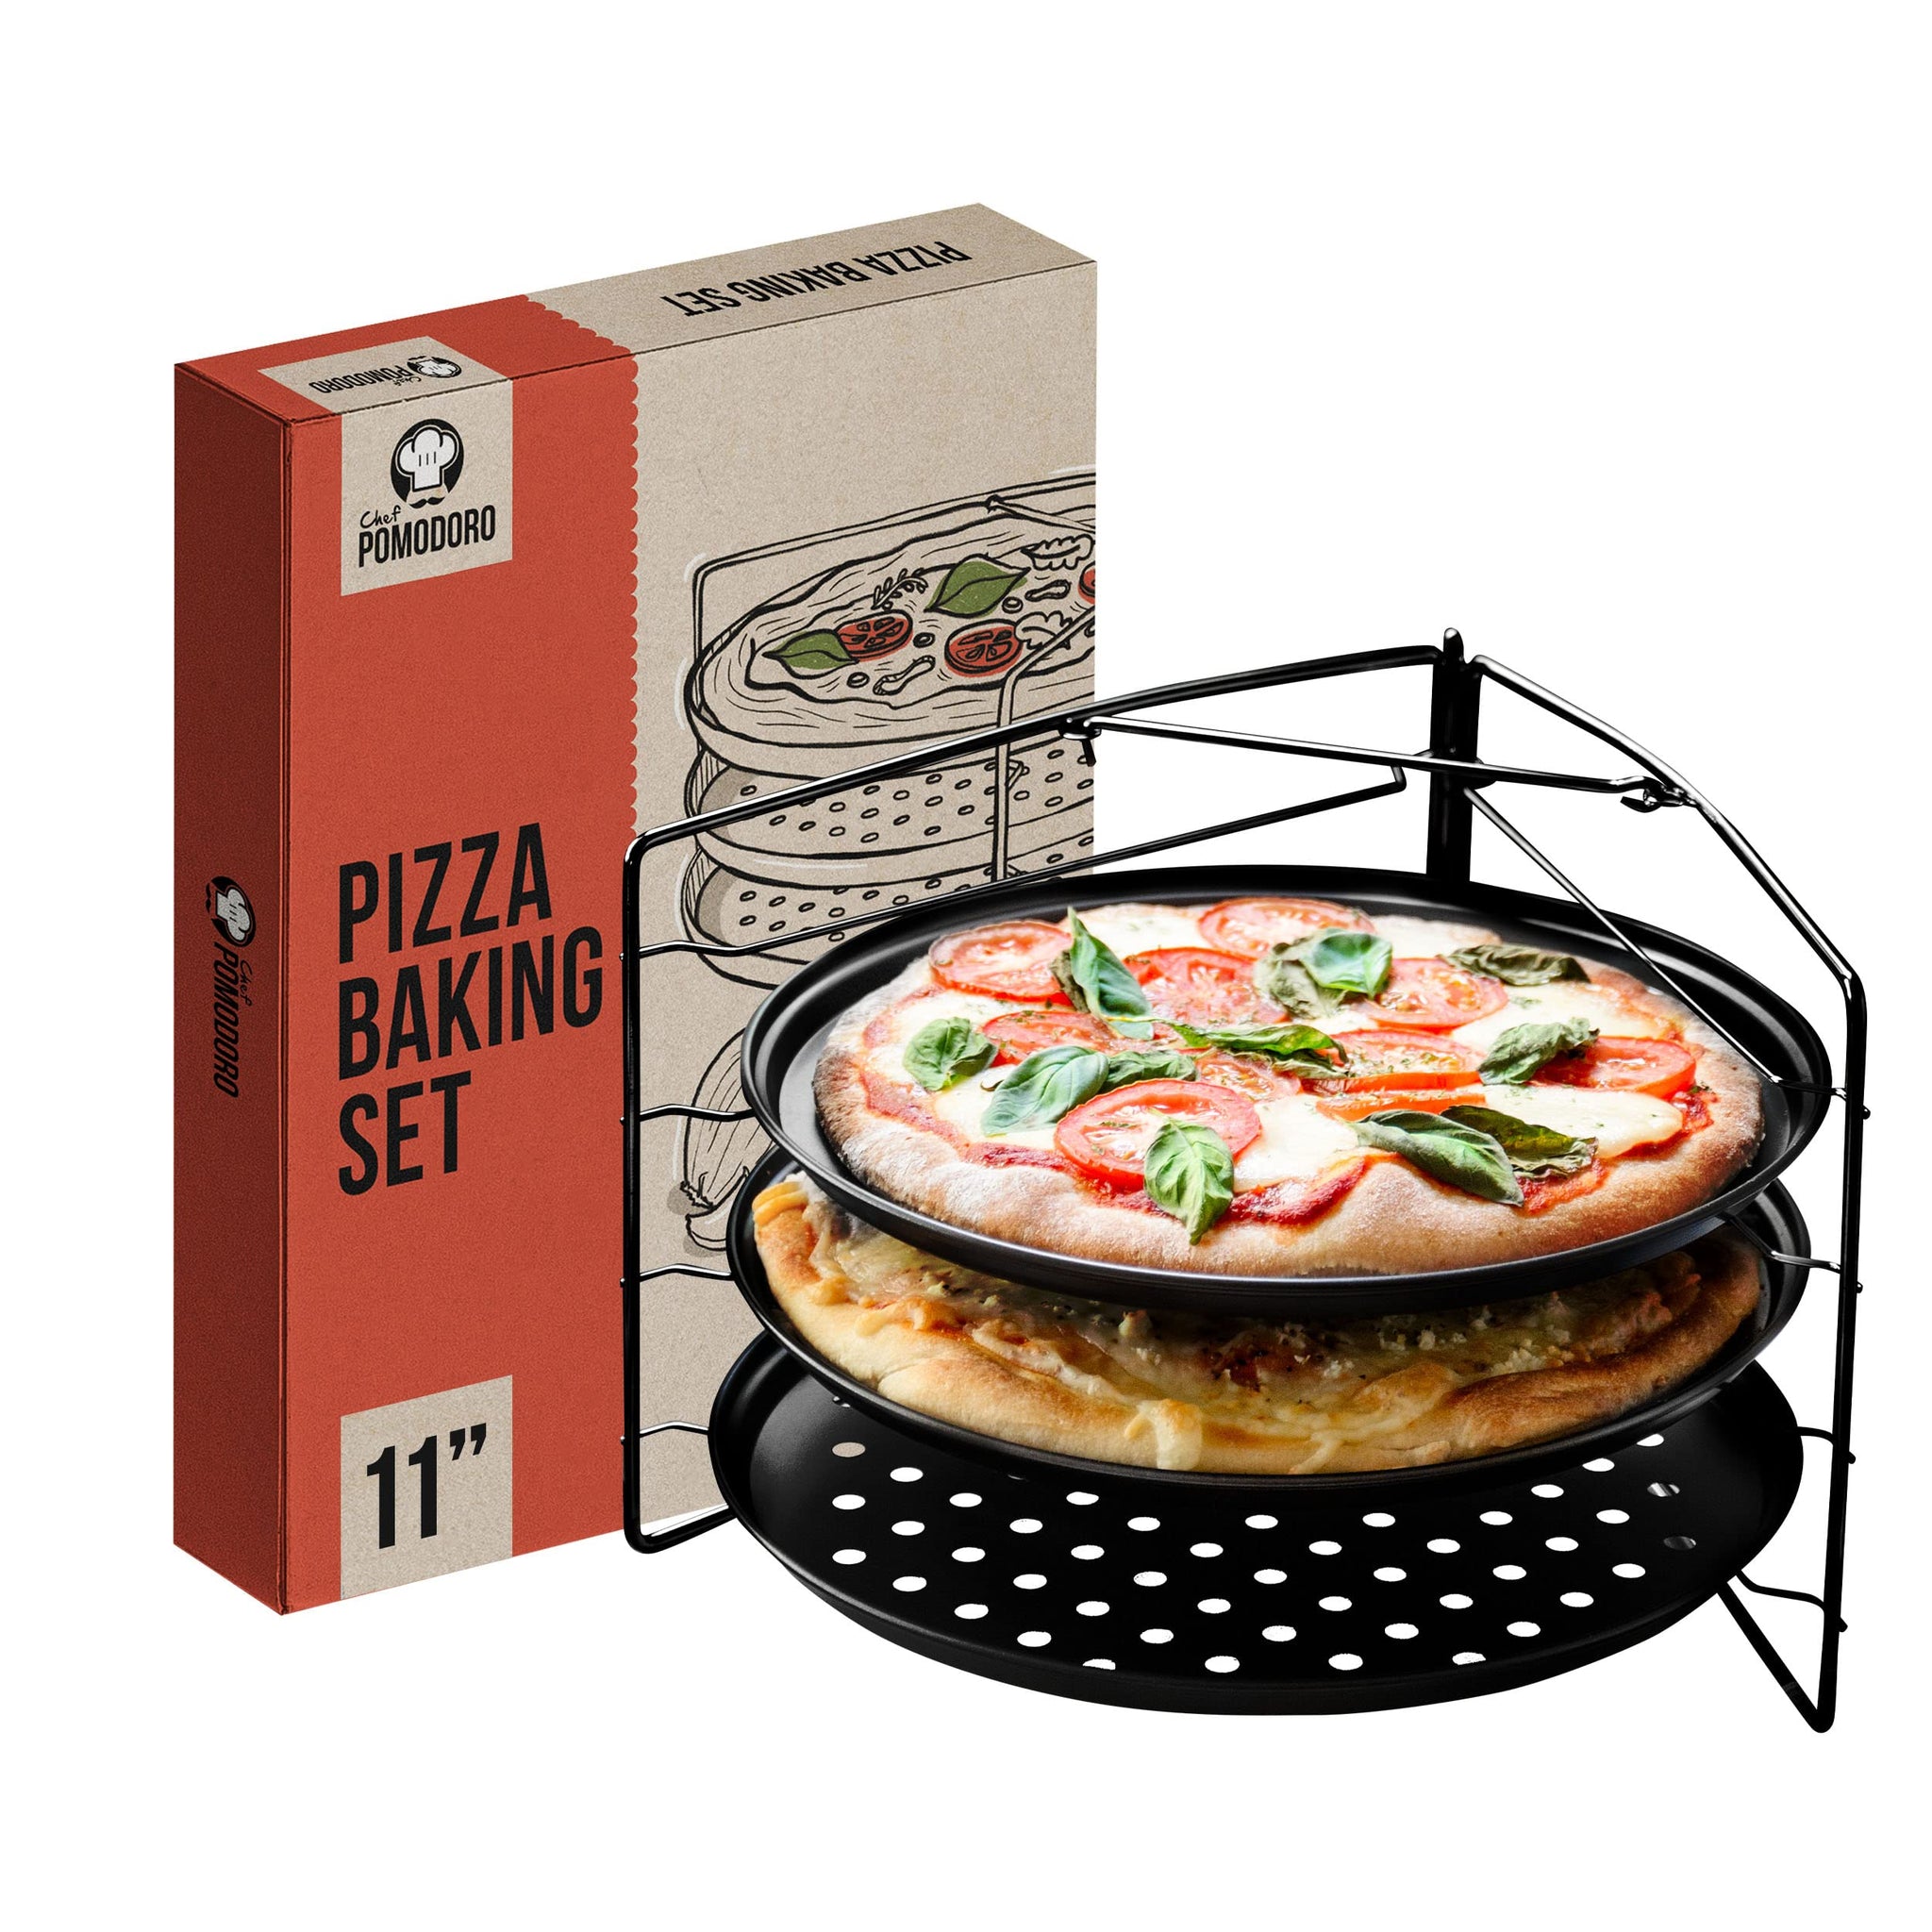 Perforated Deep Dish Pizza Pan Made in the USA